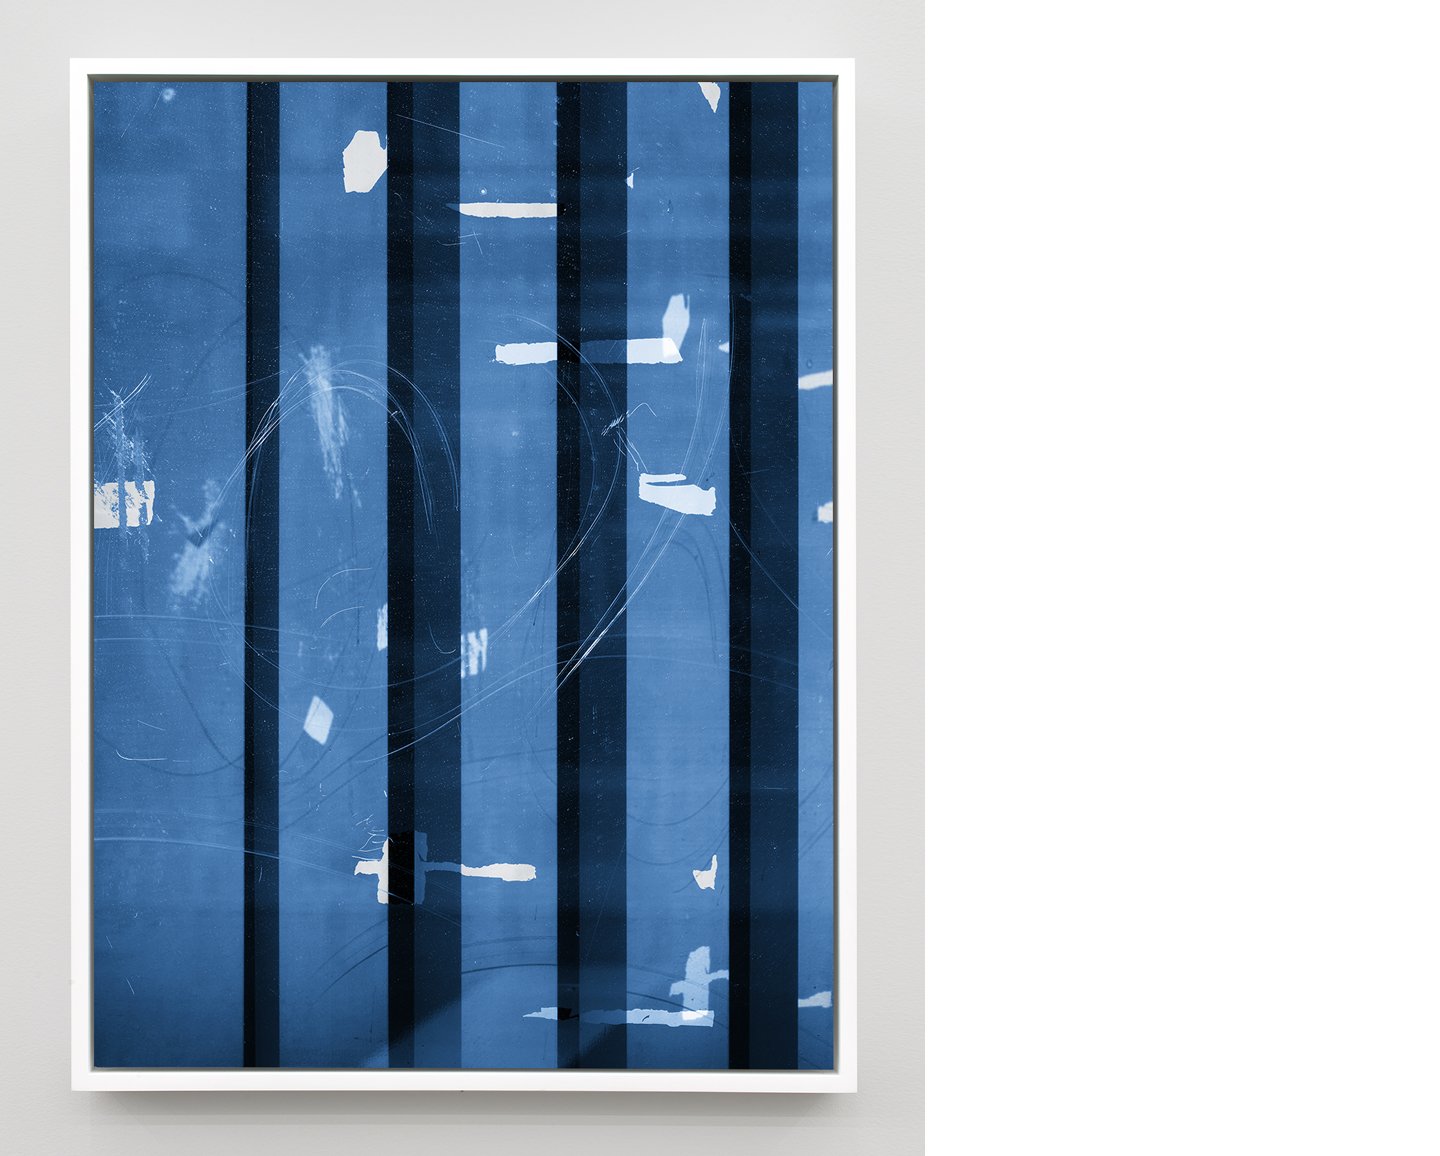   Blinds , 2015 Pigmented Inkjet Print Wood Frame 16” x 21” Edition of 5 plus 2 Artist Proofs 